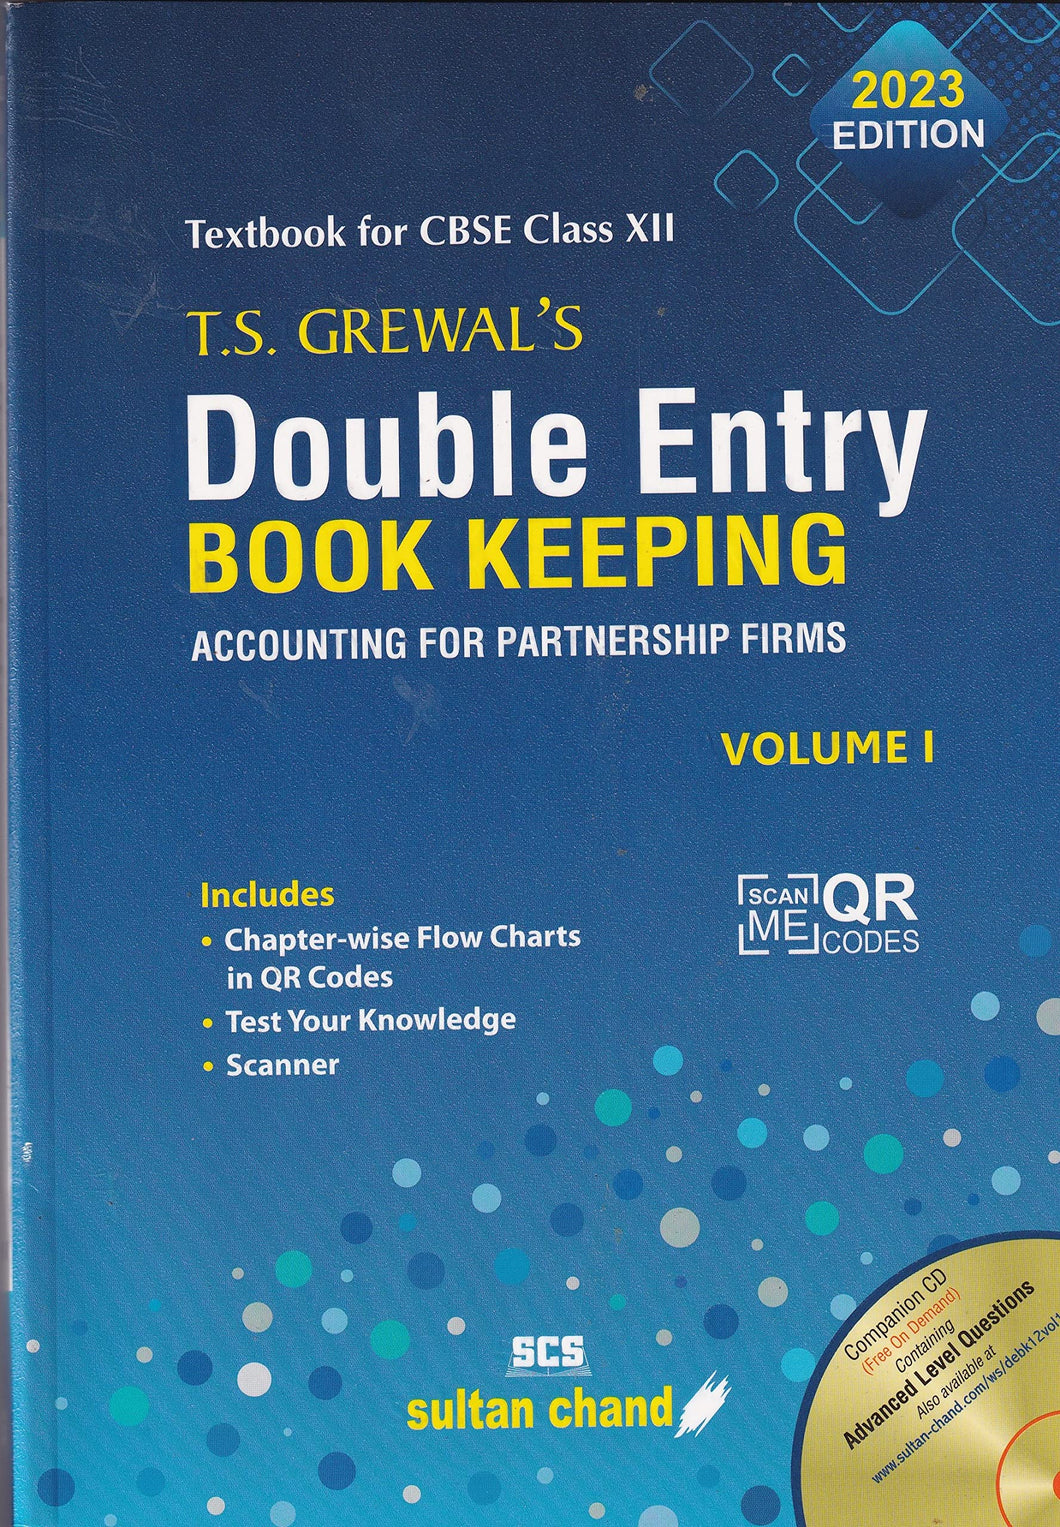 T.S. Grewal's Double Entry Book Keeping: Accounting for Not-for-Profit Organizations and Partnership Firms -( Vol. 1) Textbook for CBSE Class 12 (2023-24)